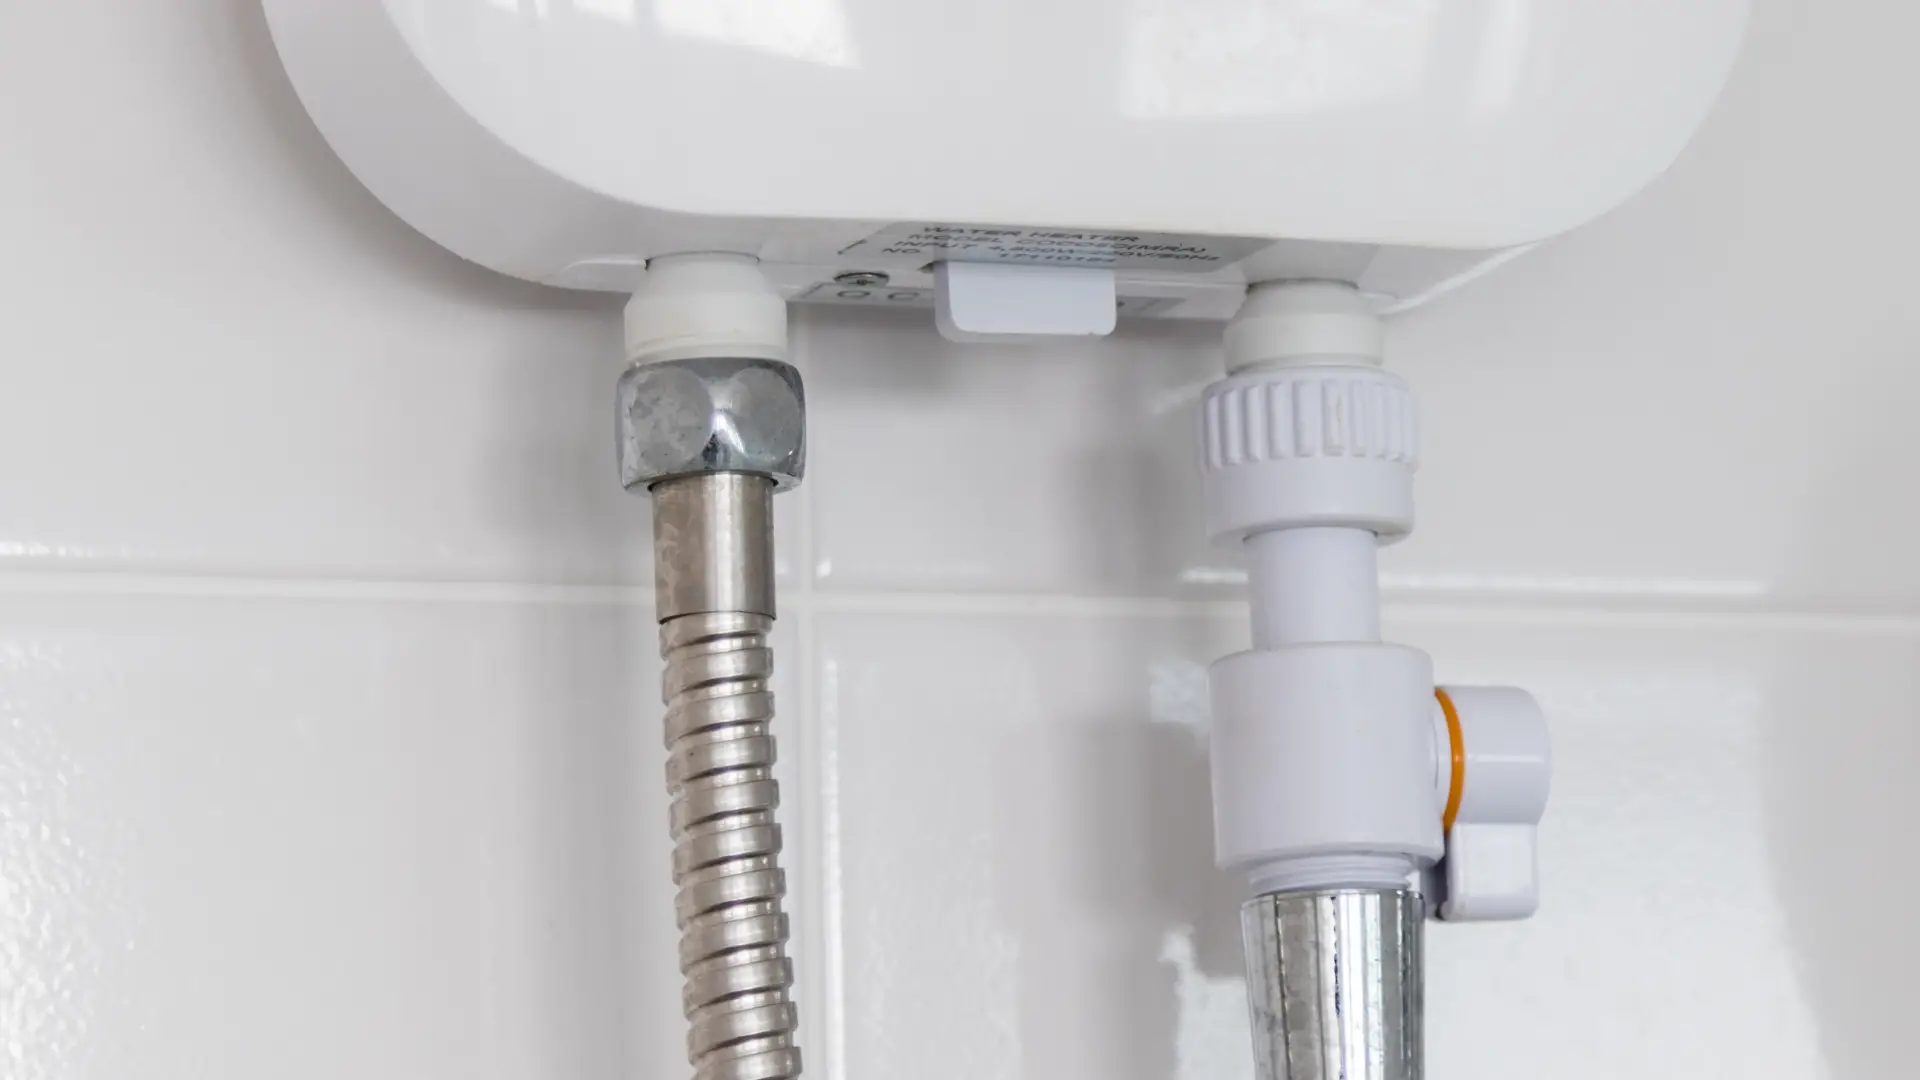 Water inlets and outlets to a white tankless water heater